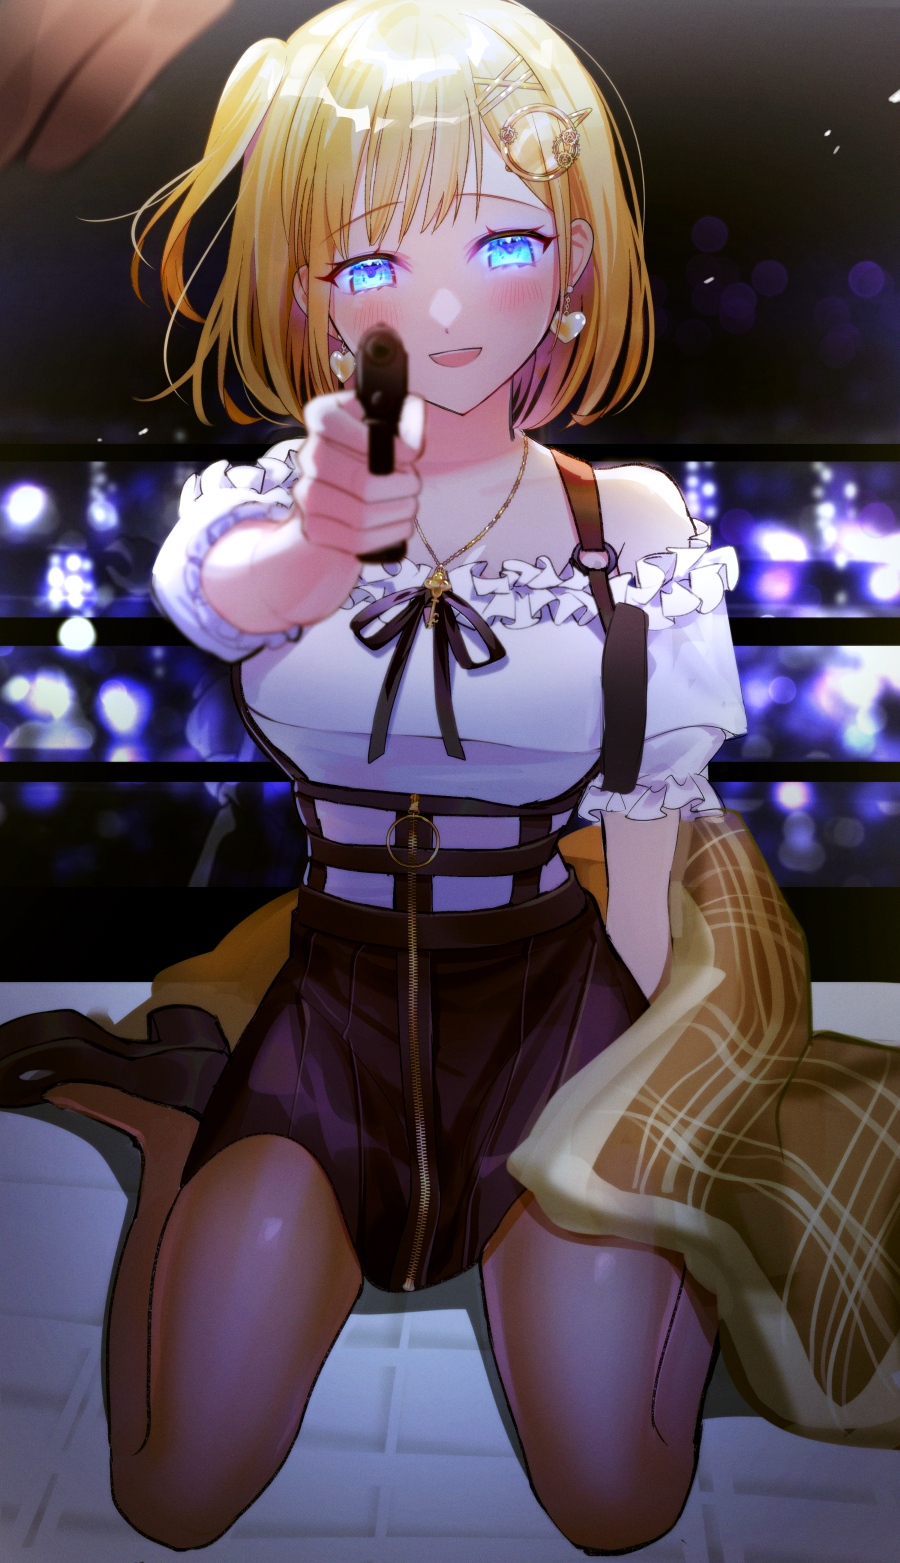 1girl :d aiming_at_viewer bangs bare_shoulders blonde_hair blue_eyes blurry blush breasts dega1028 depth_of_field earrings eyebrows_visible_through_hair finger_on_trigger glowing glowing_eyes gun hair_ornament handgun heart heart_earrings high_heels highres holding holding_gun holding_weapon hololive hololive_english holster jewelry key looking_at_viewer medium_breasts monocle_hair_ornament necklace one_side_up open_mouth pantyhose pistol pointing_weapon pov shirt shoes short_hair skirt smile solo virtual_youtuber watson_amelia weapon white_shirt zipper